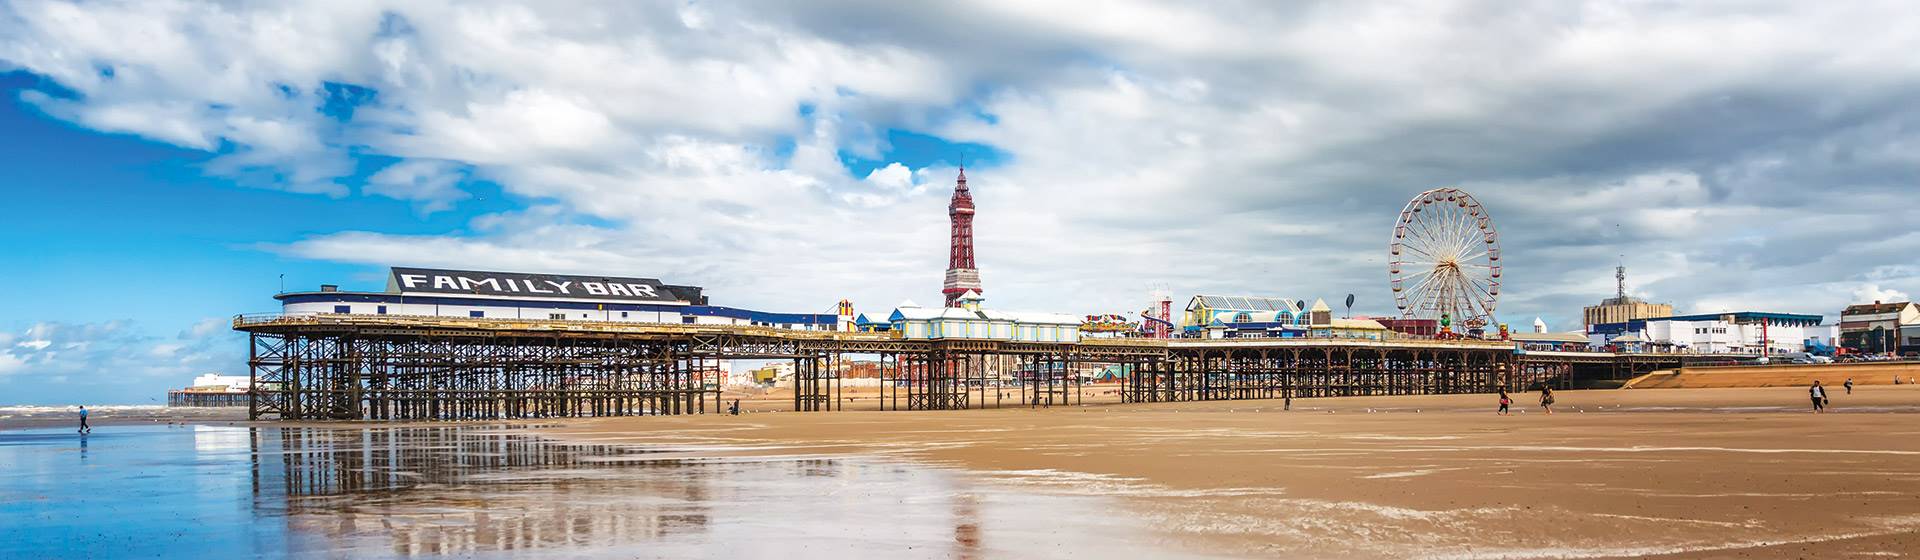 Best of the North West Ft Blackpool